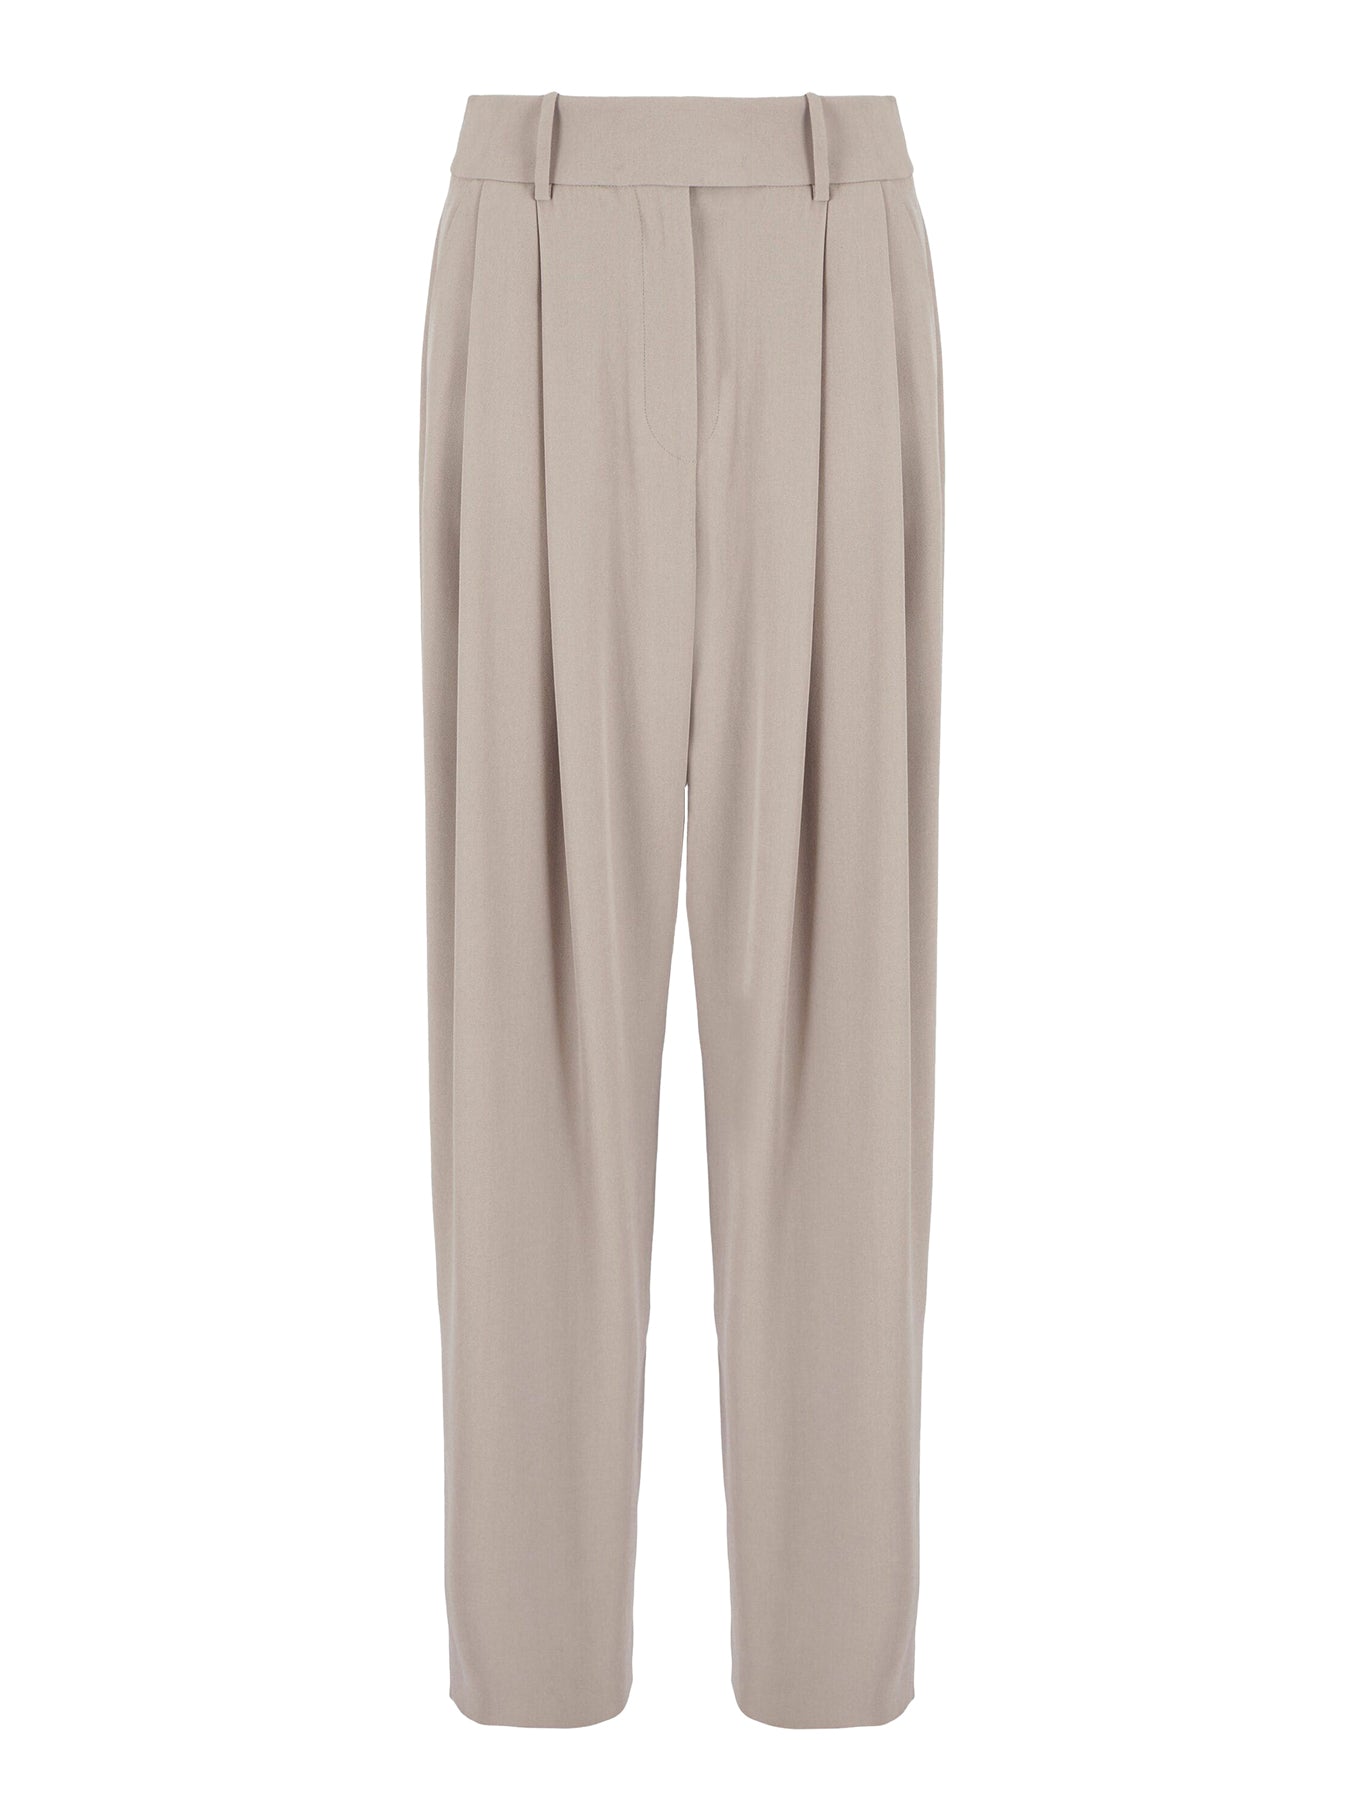 silk-georgette tailored trousers